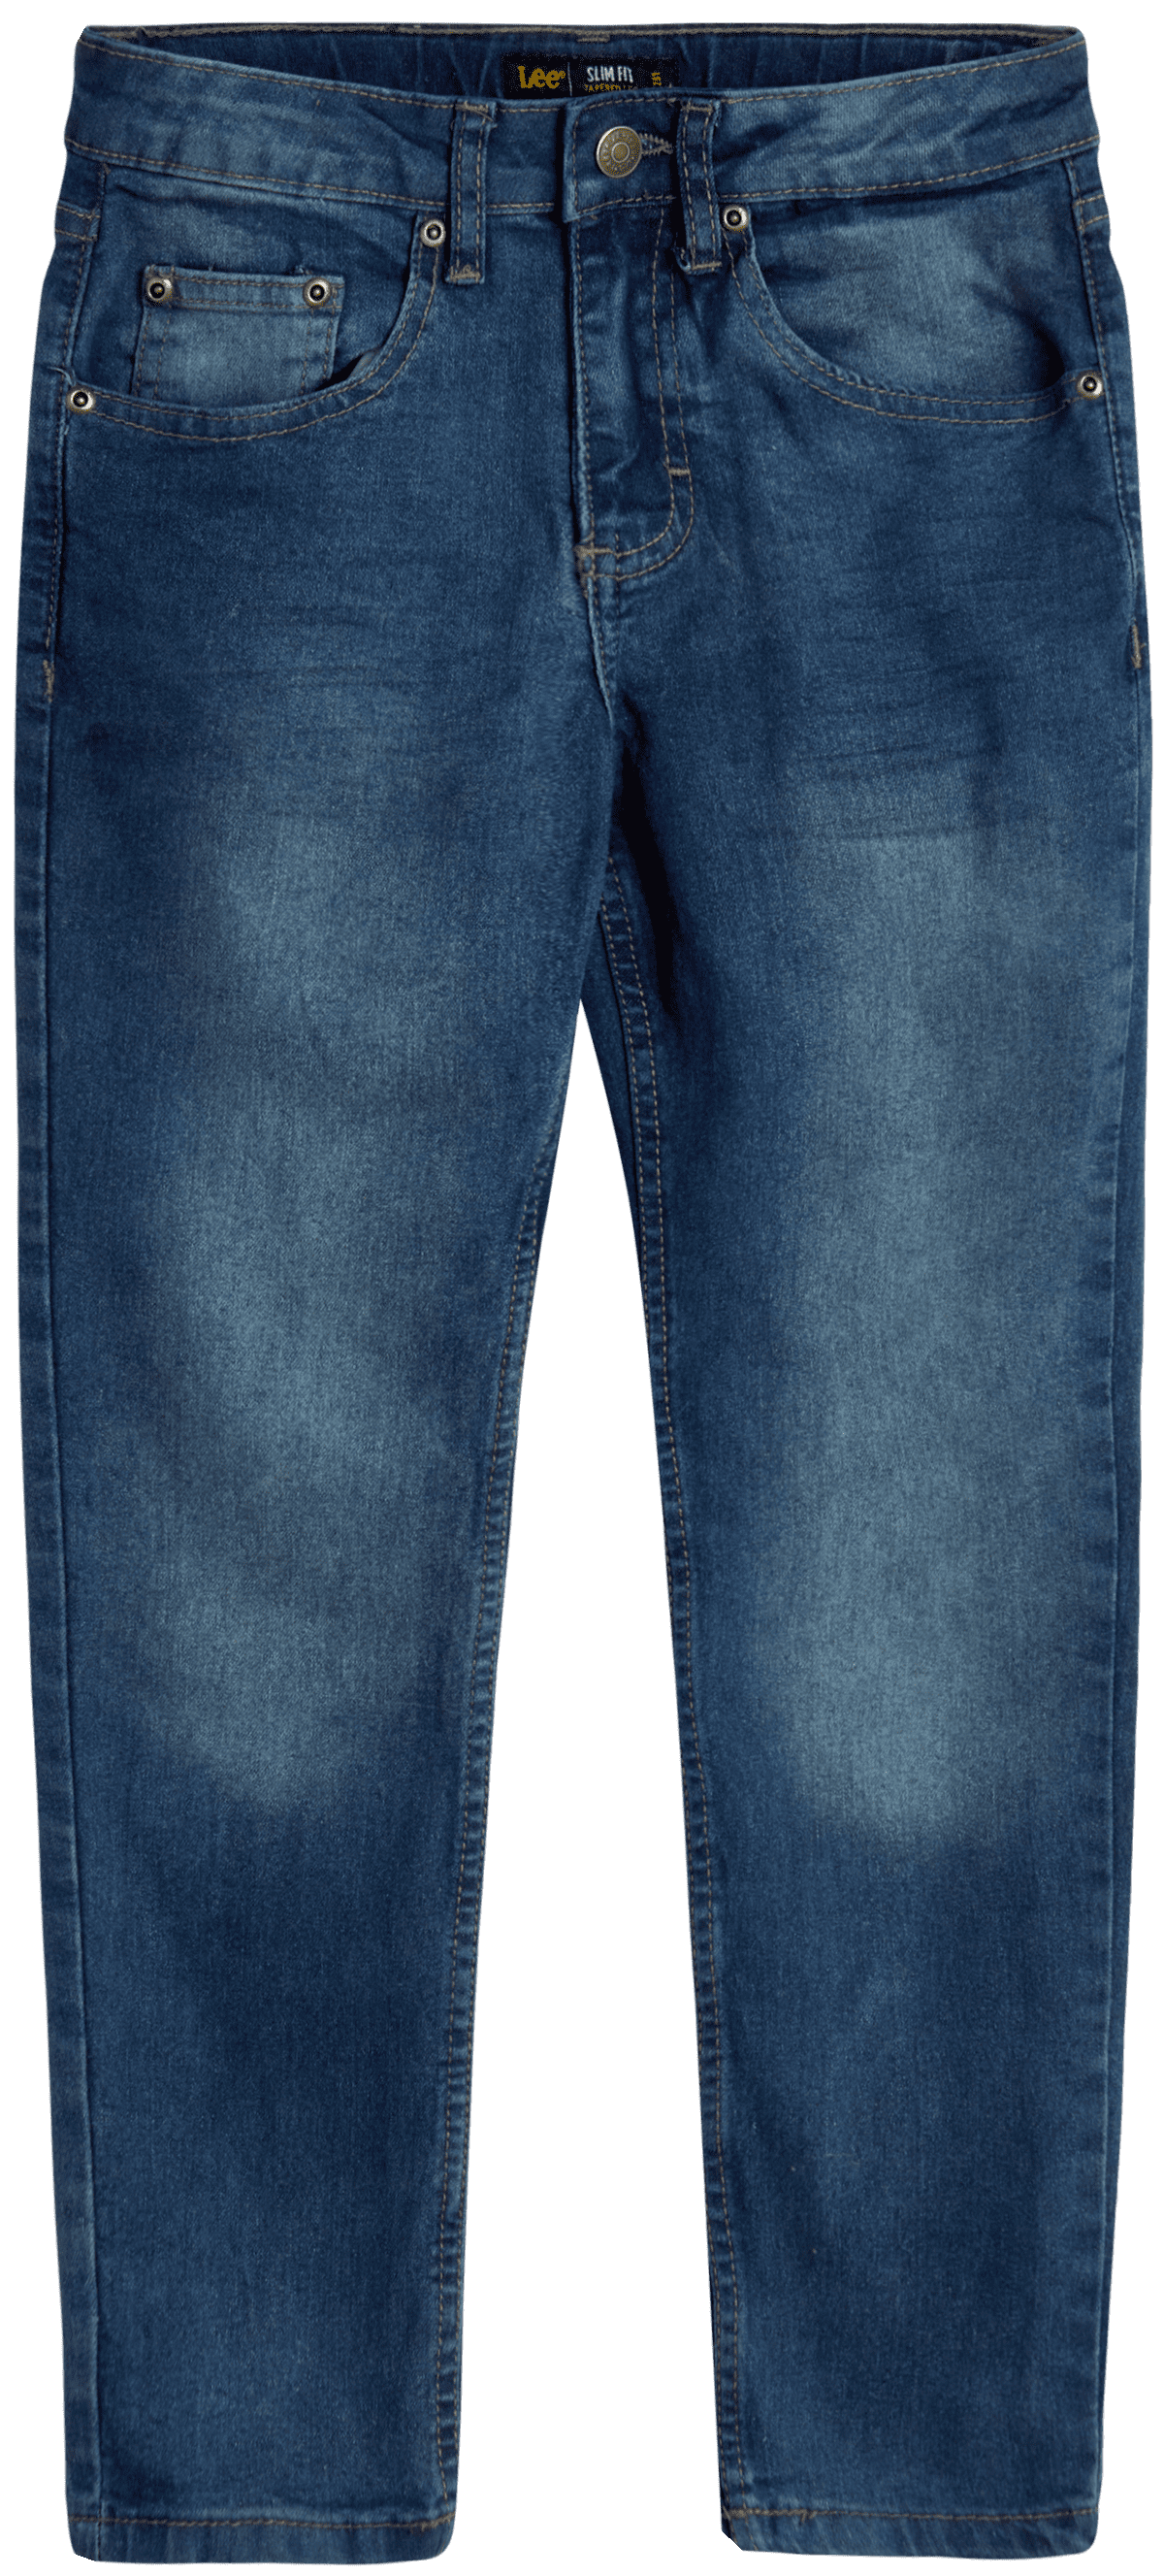 Lee Boys' Slim Fit Denim Jeans - Ultra Stretch Casual Pants for Boys  (2T-16) 